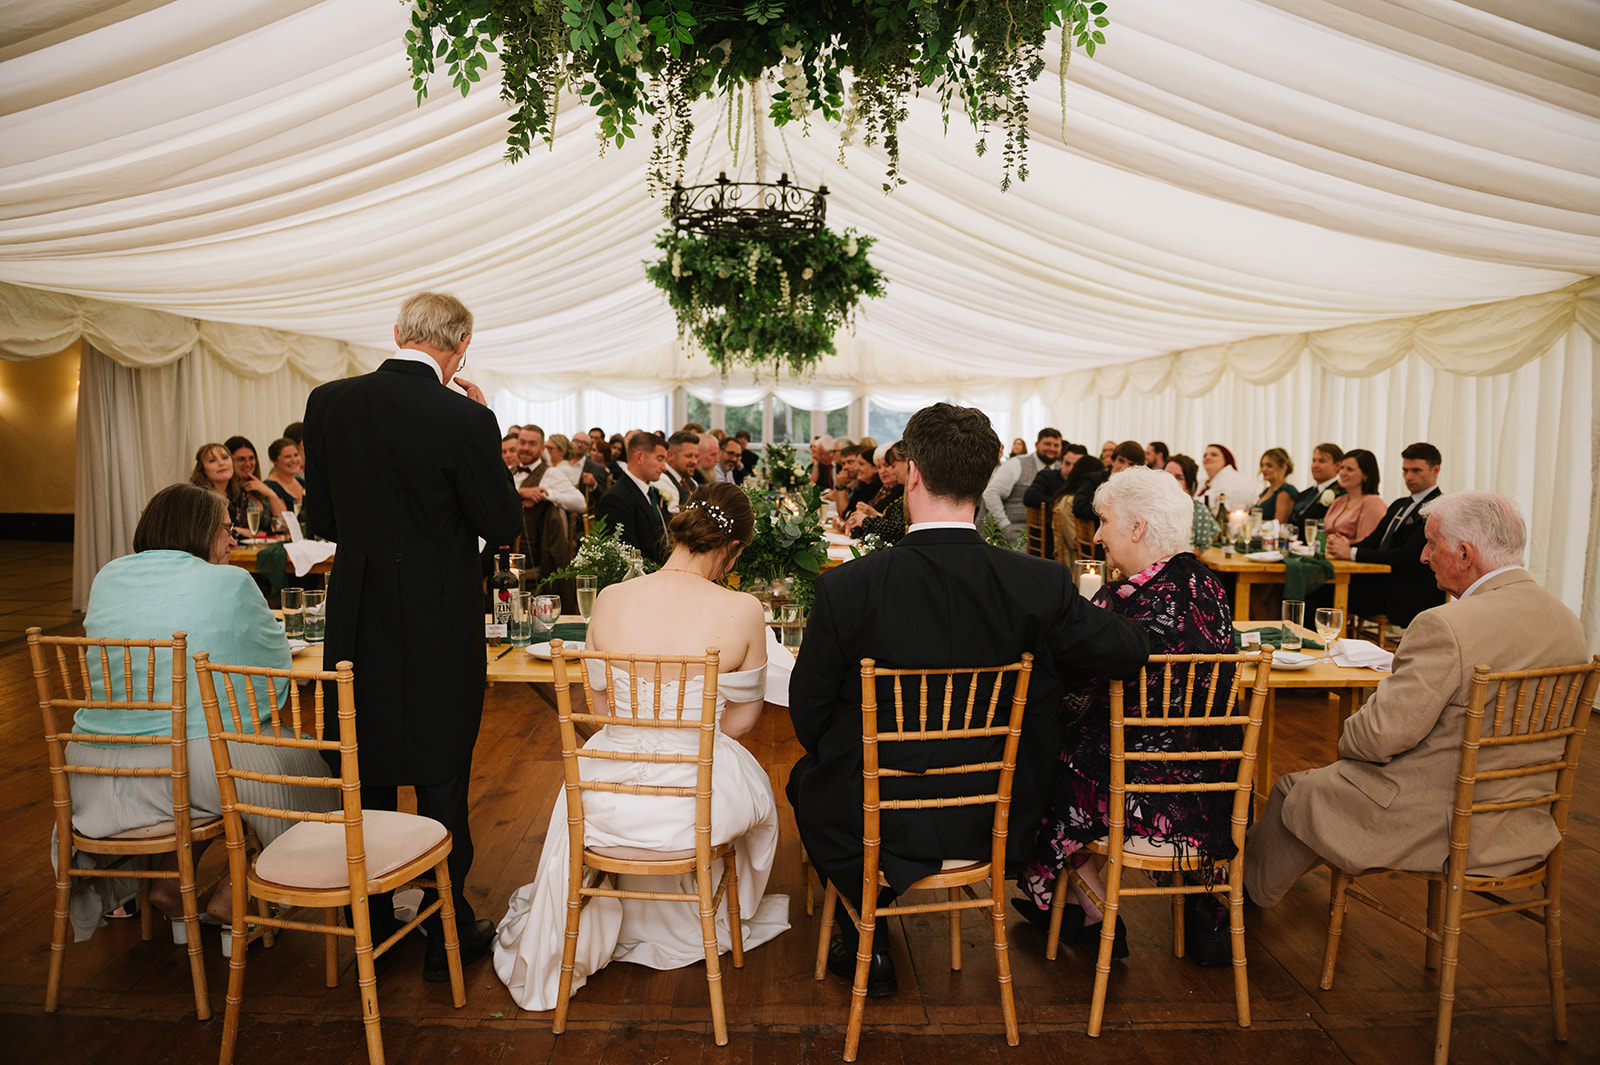 The father of the bride speech in the marquee from behind the top table so you can see the guests listening